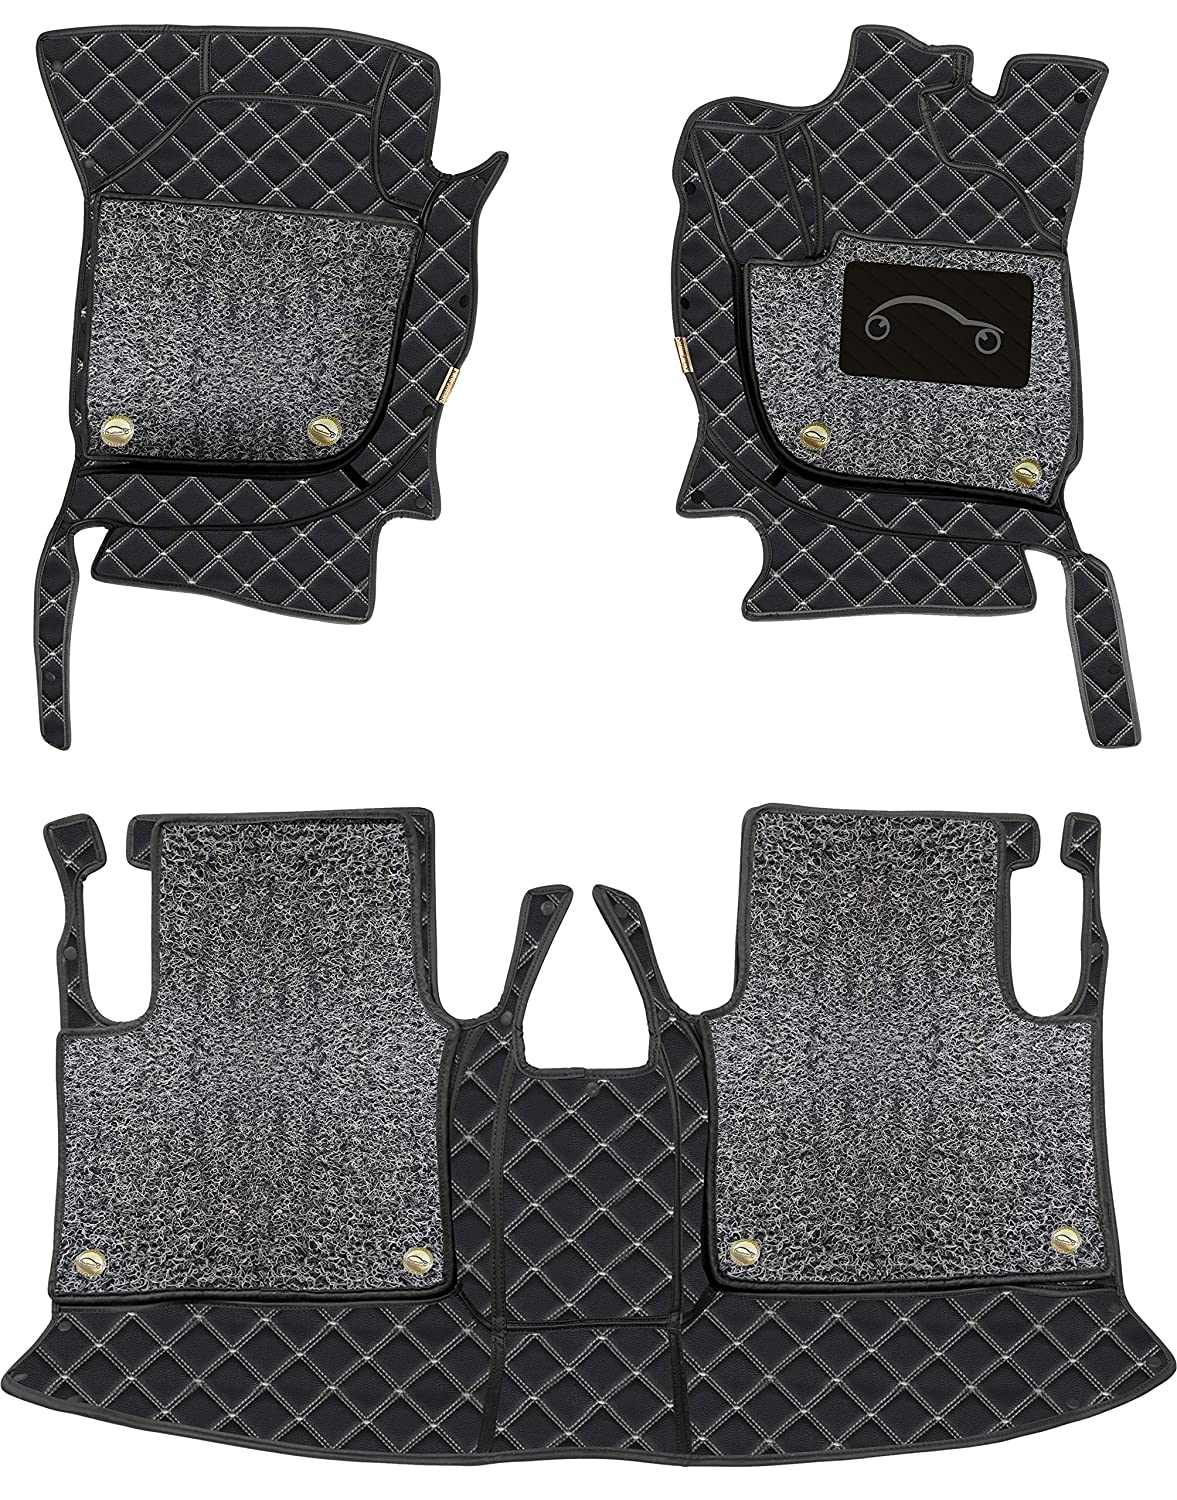 Mini Cooper D Countryman 2017 7D Luxury Car Mat, All Weather Proof, Anti-Skid, 100% Waterproof & Odorless with Unique Diamond Fish Design (24mm Luxury PU Leather, 2 Rows)